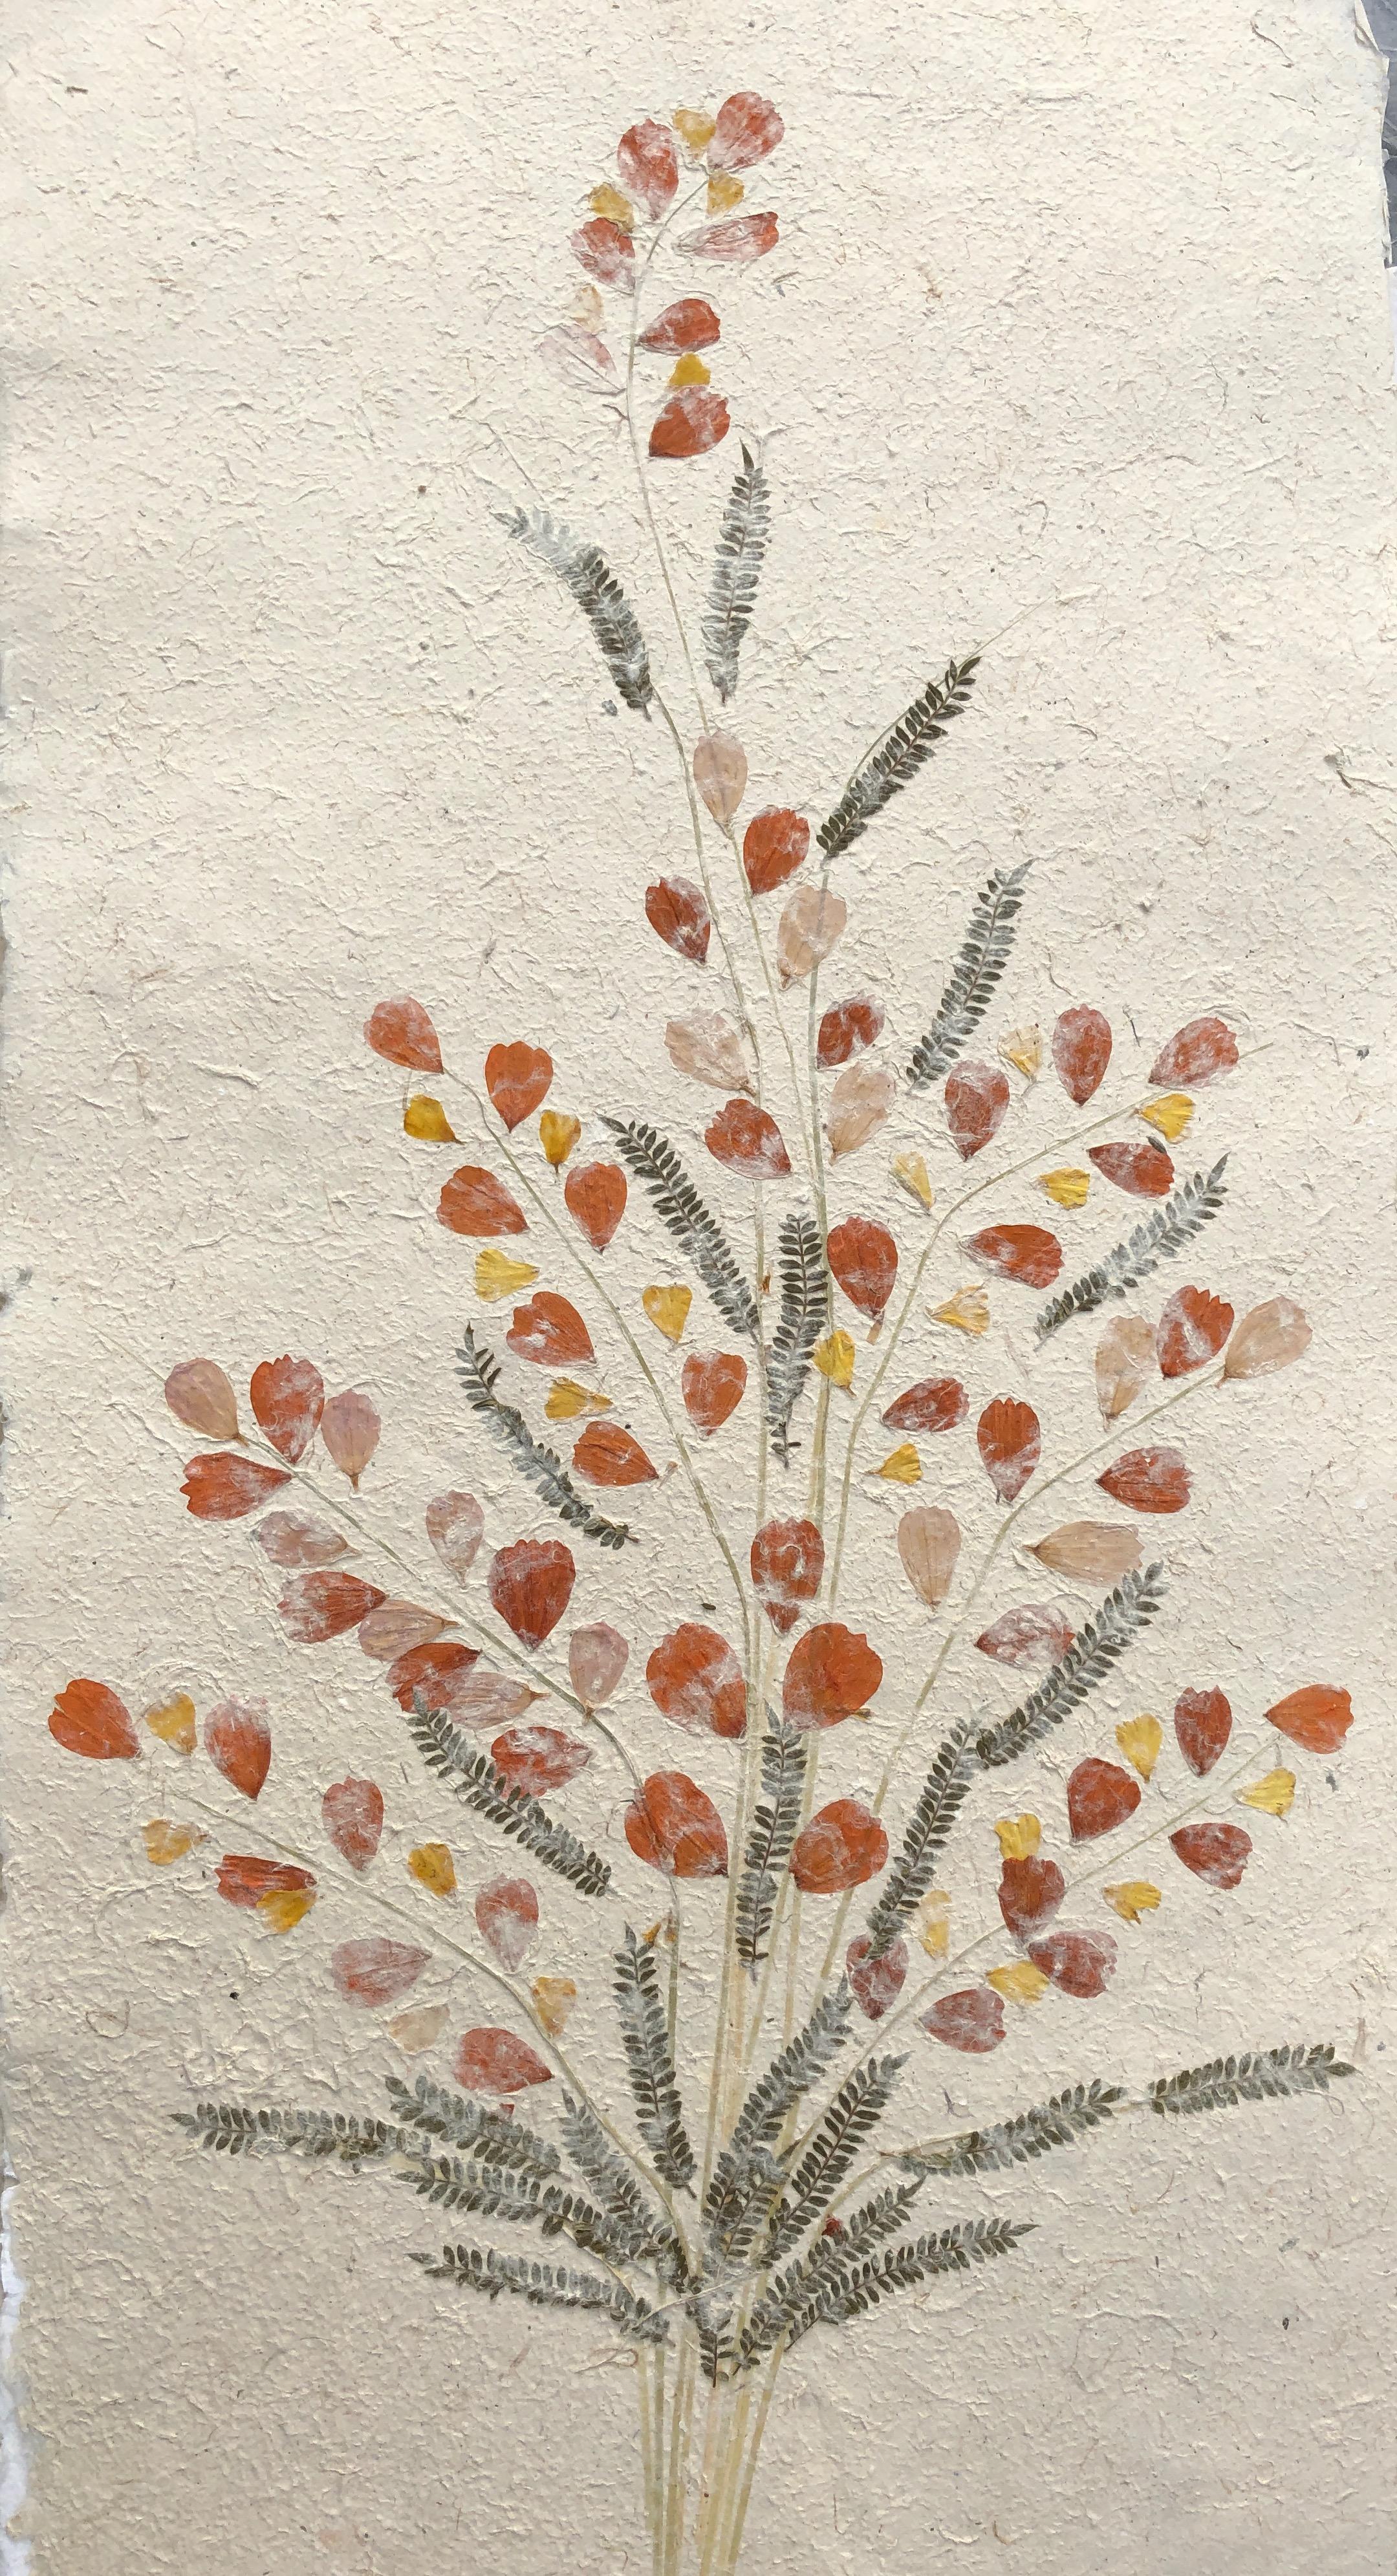 Madagascan Dried Flowers On Hand Made Paper - Art by Unknown